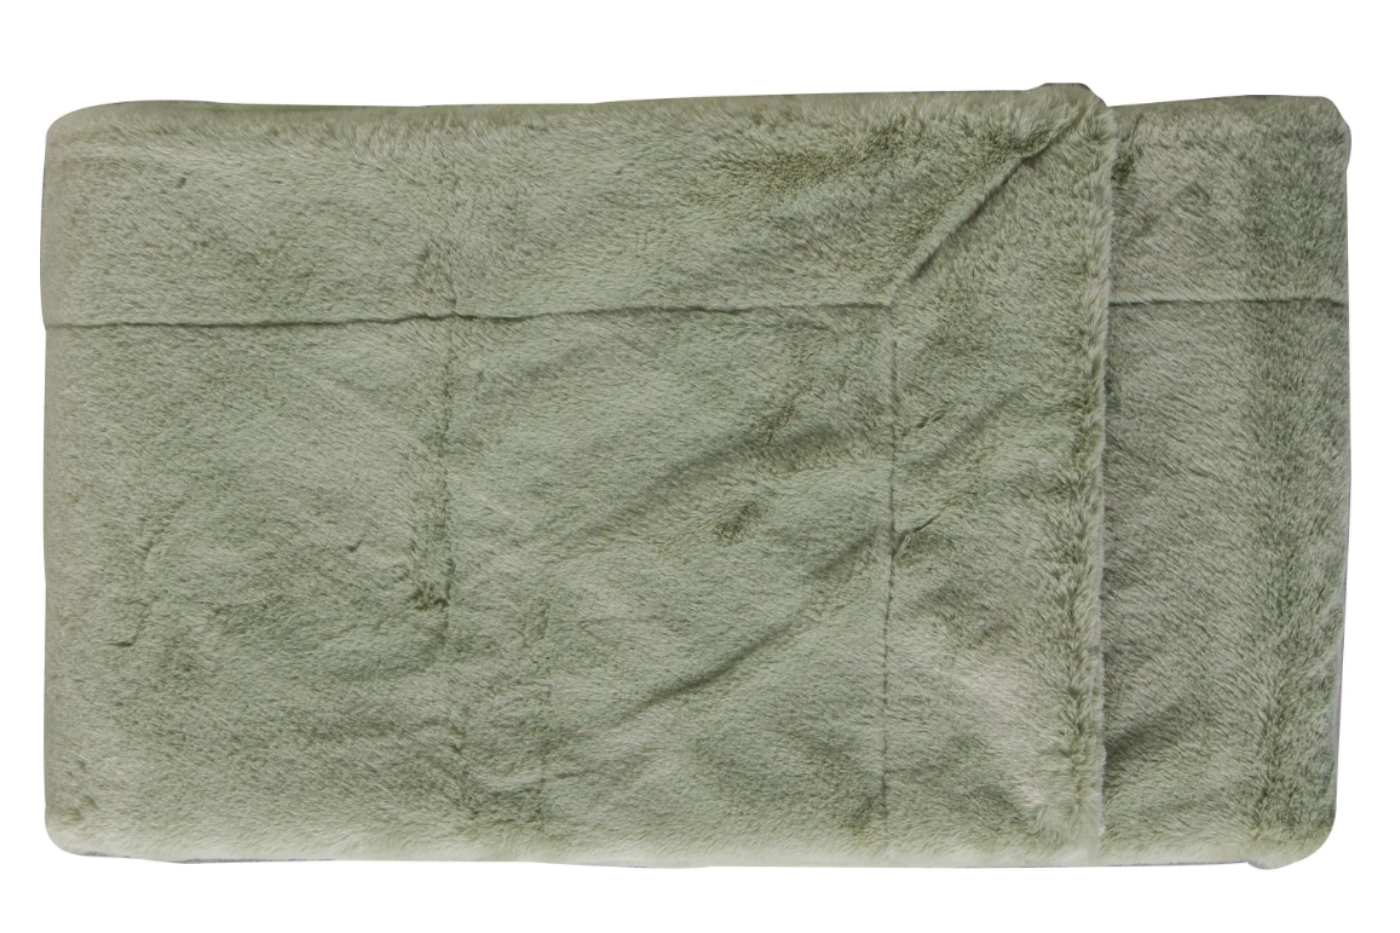 View Pale Green Faux Fur Throw With Stitched Fold Over Border Large information